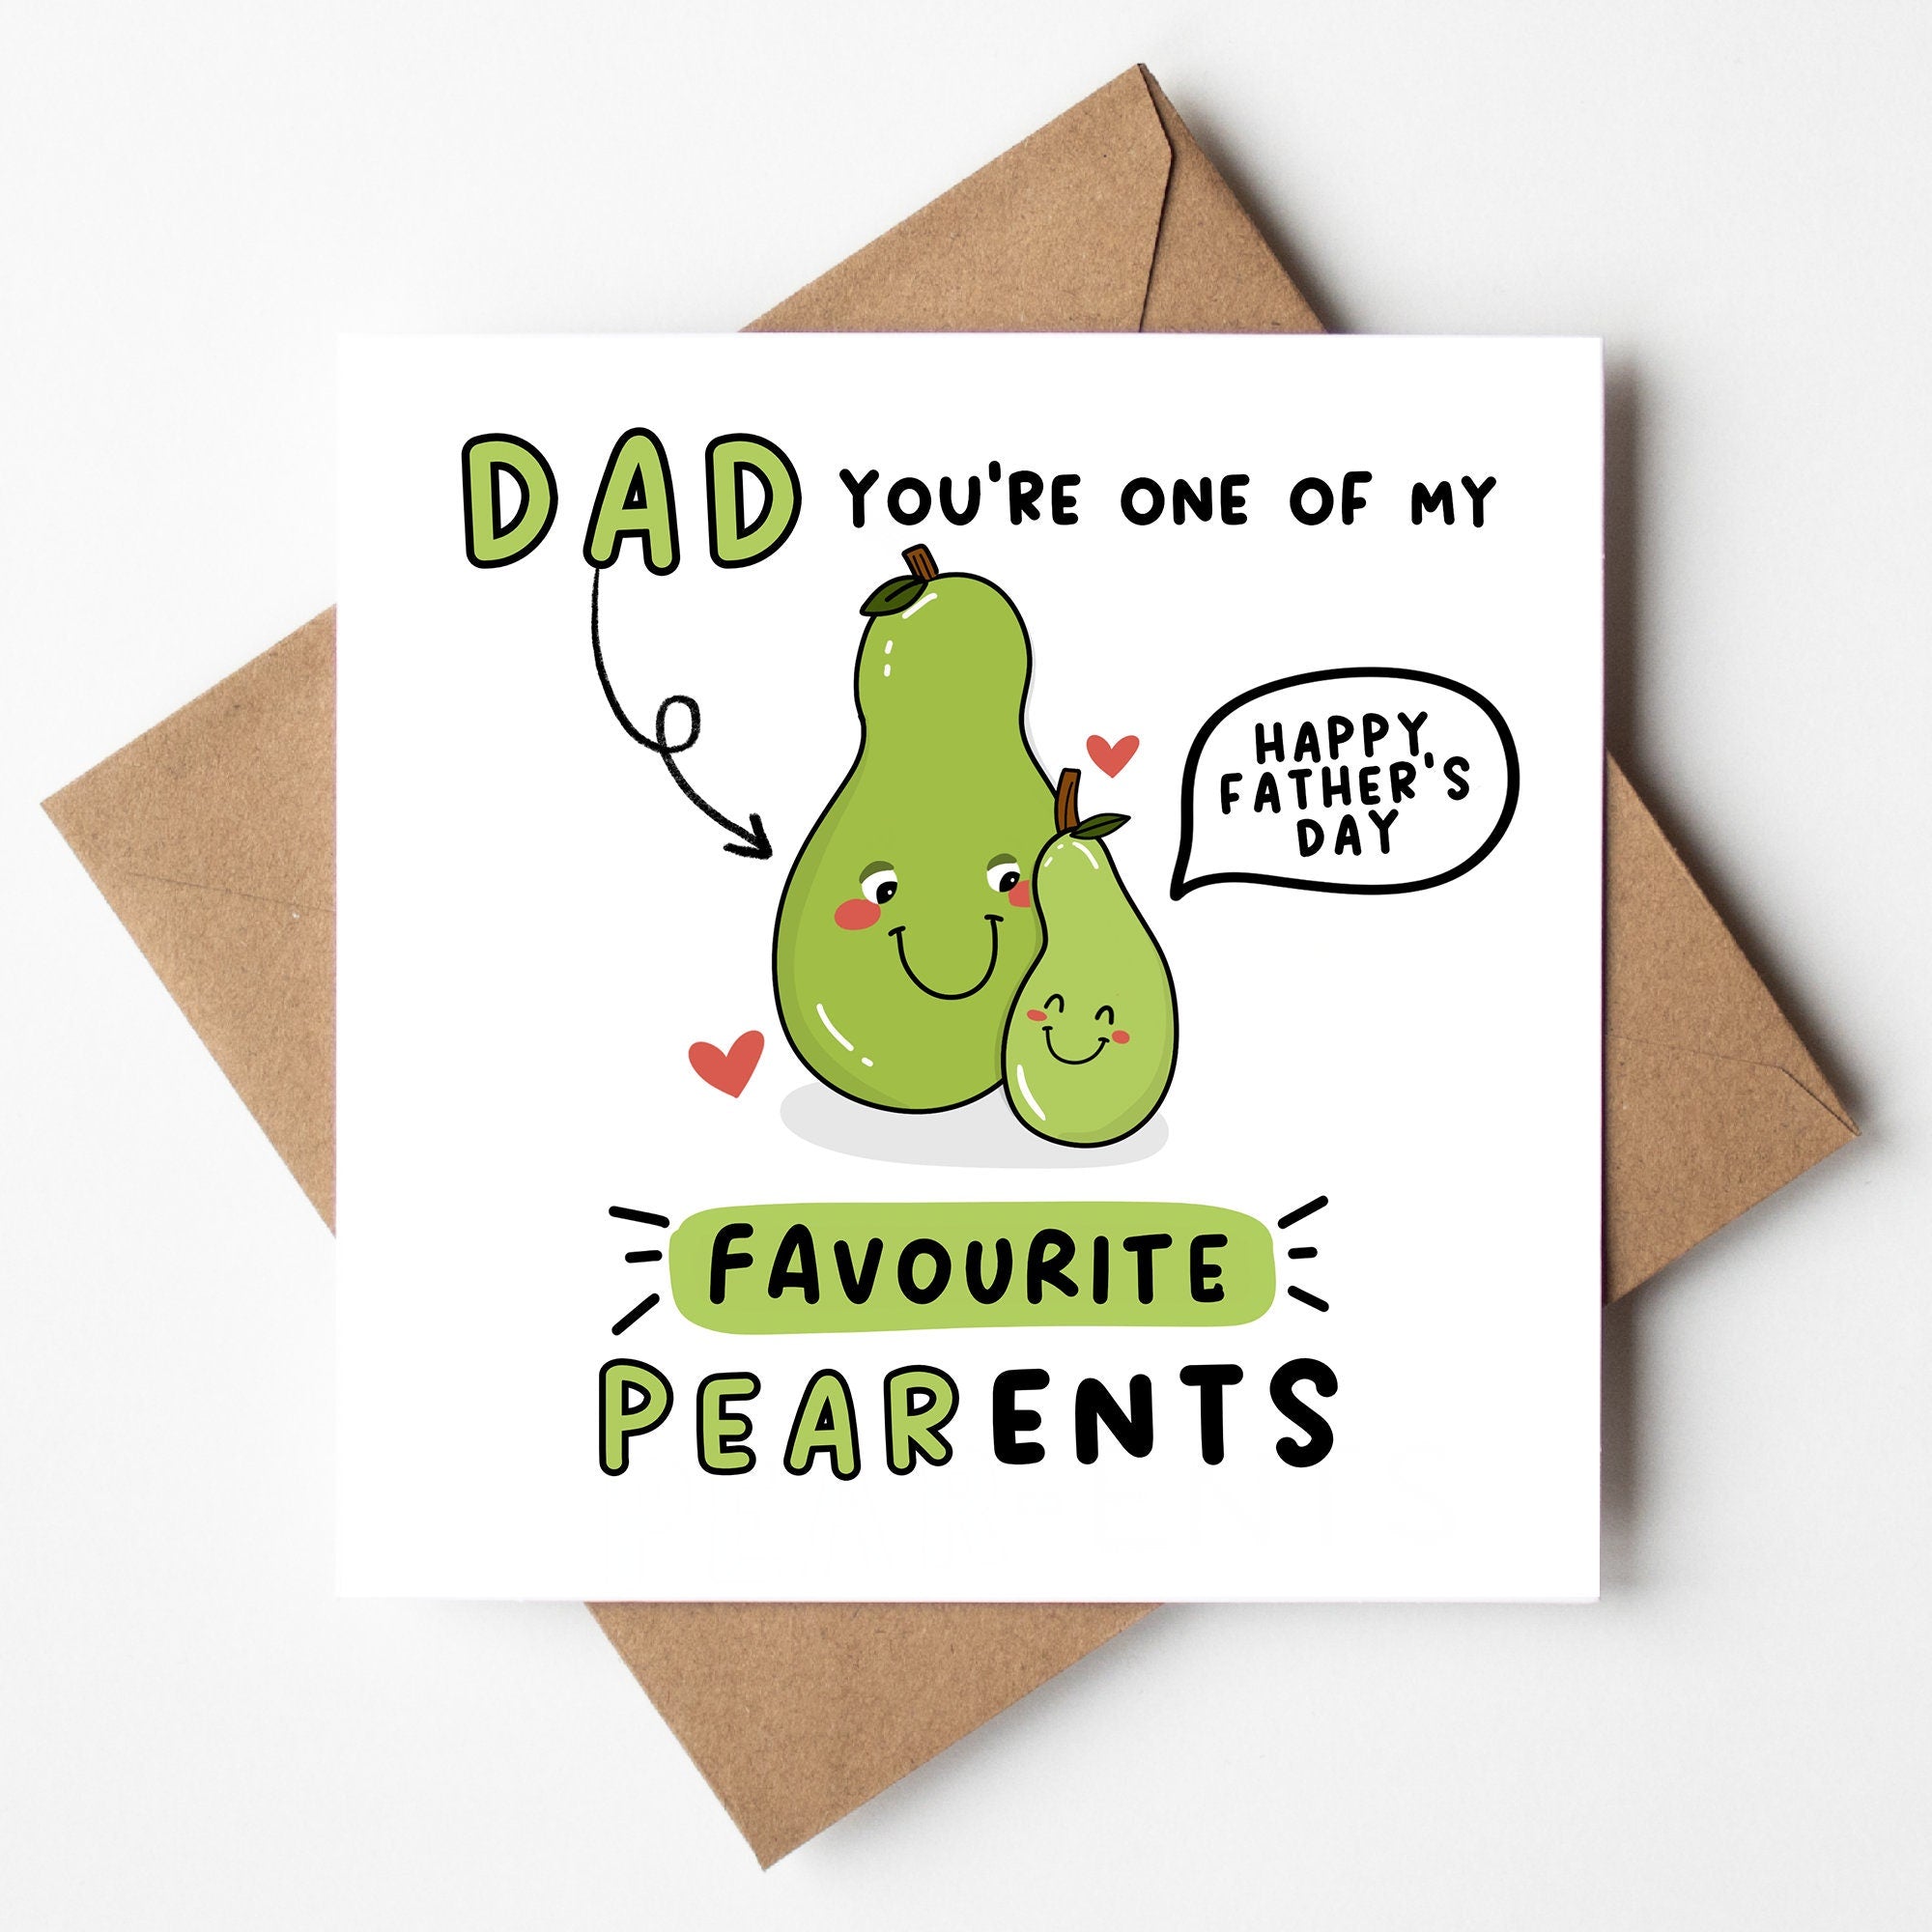 Dad You're One Of My Favourite Pear-ants, Happy Fathers Day, Funny Father's Day Card, For Dad, From Son, From Daughter